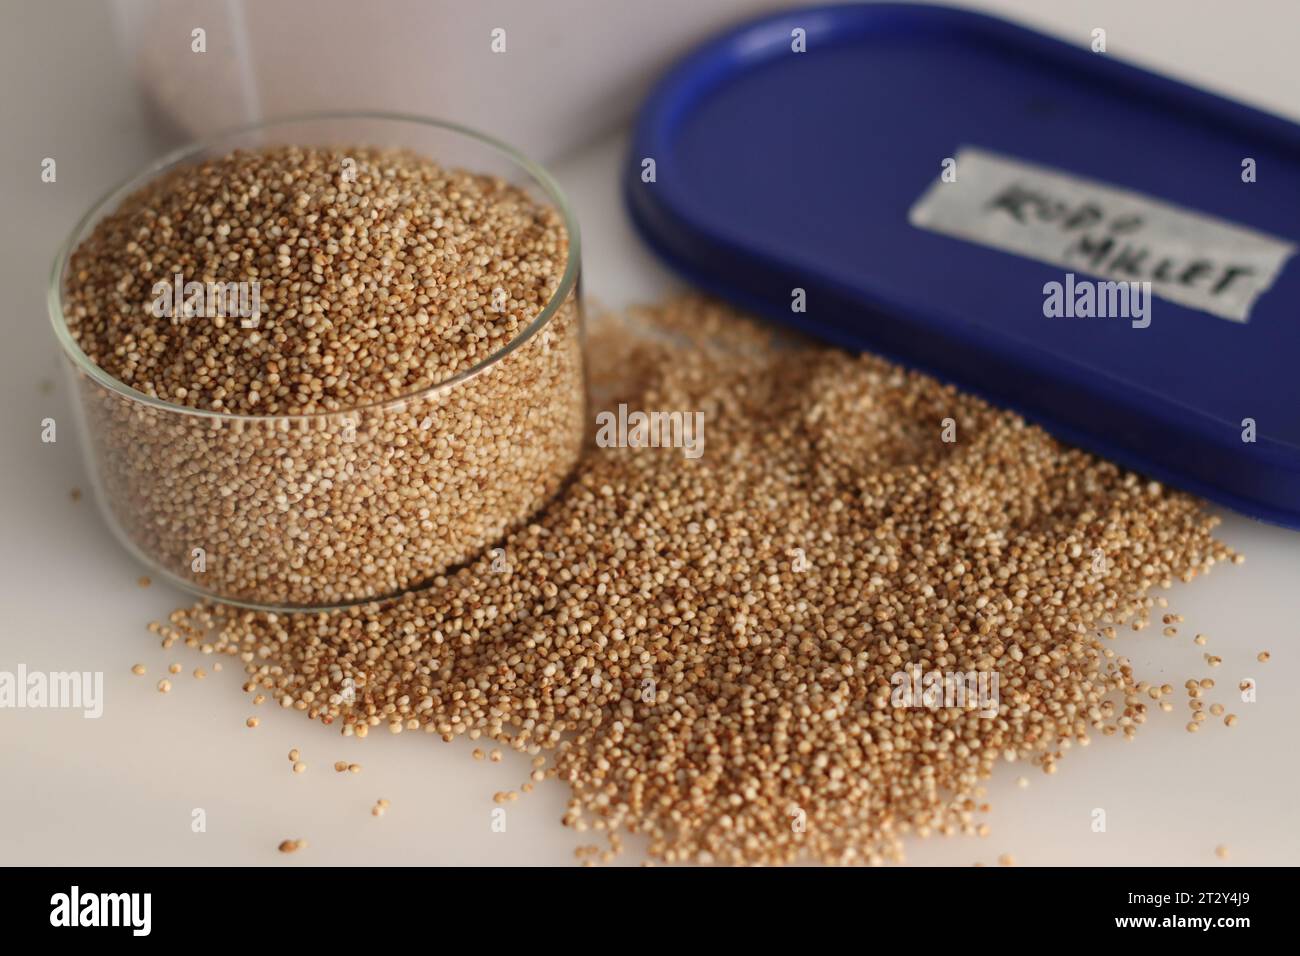 Closeup of kodo millet, a healthy grain, in a container and glass bowl filled to the brim, highlighting their wholesome and nutritious appeal. Perfect Stock Photo